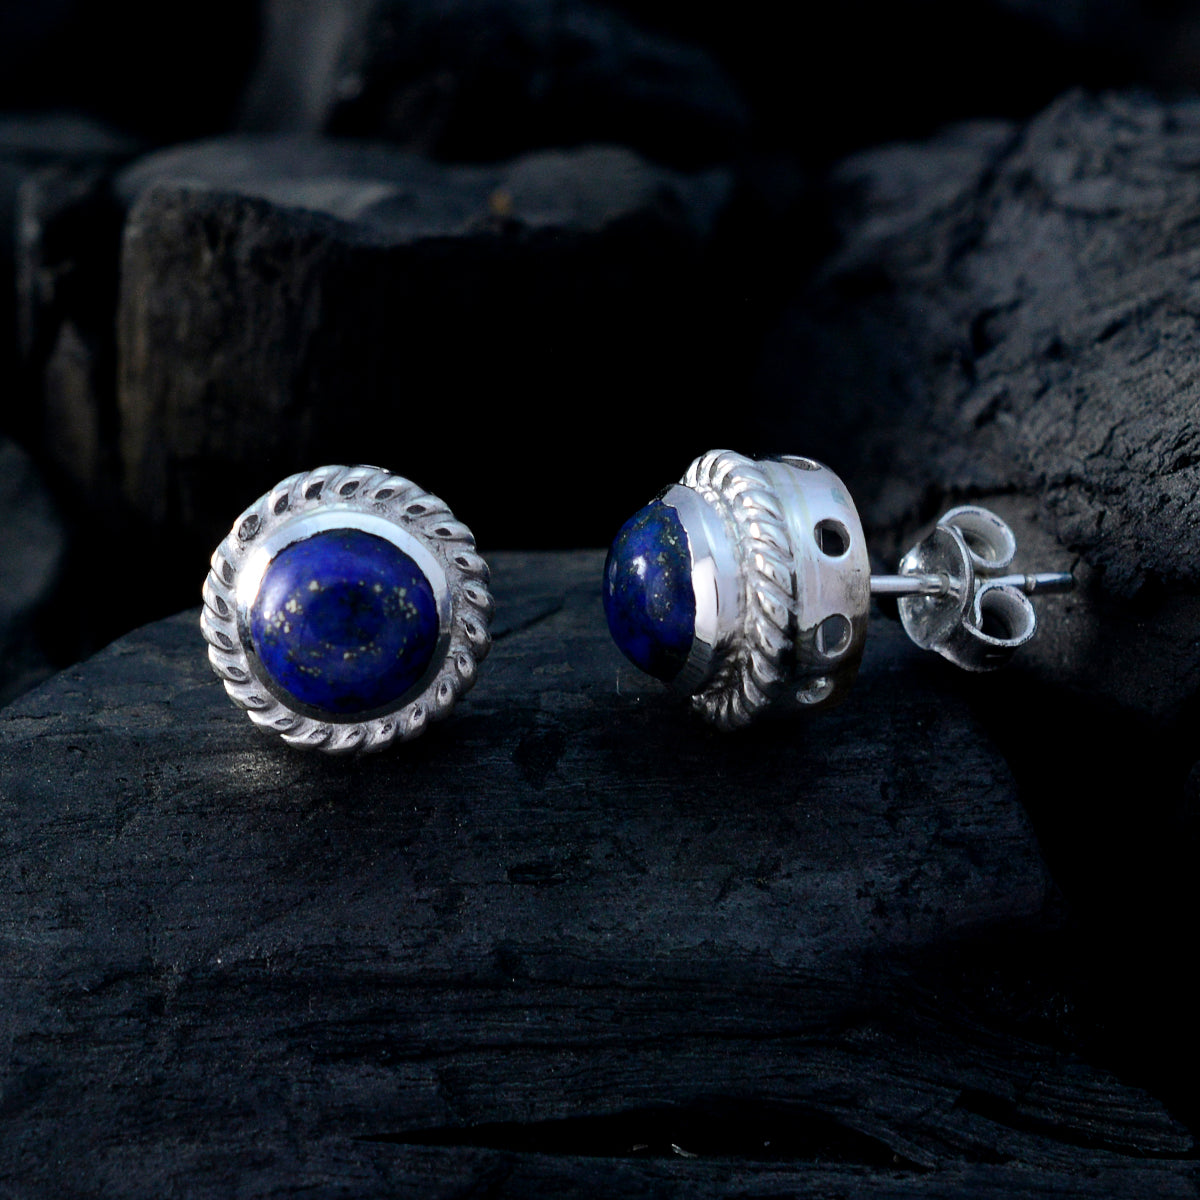 Riyo Genuine Gems round Cabochon Nevy Blue Lapis Lazuli Silver Earrings gift for thanks giving